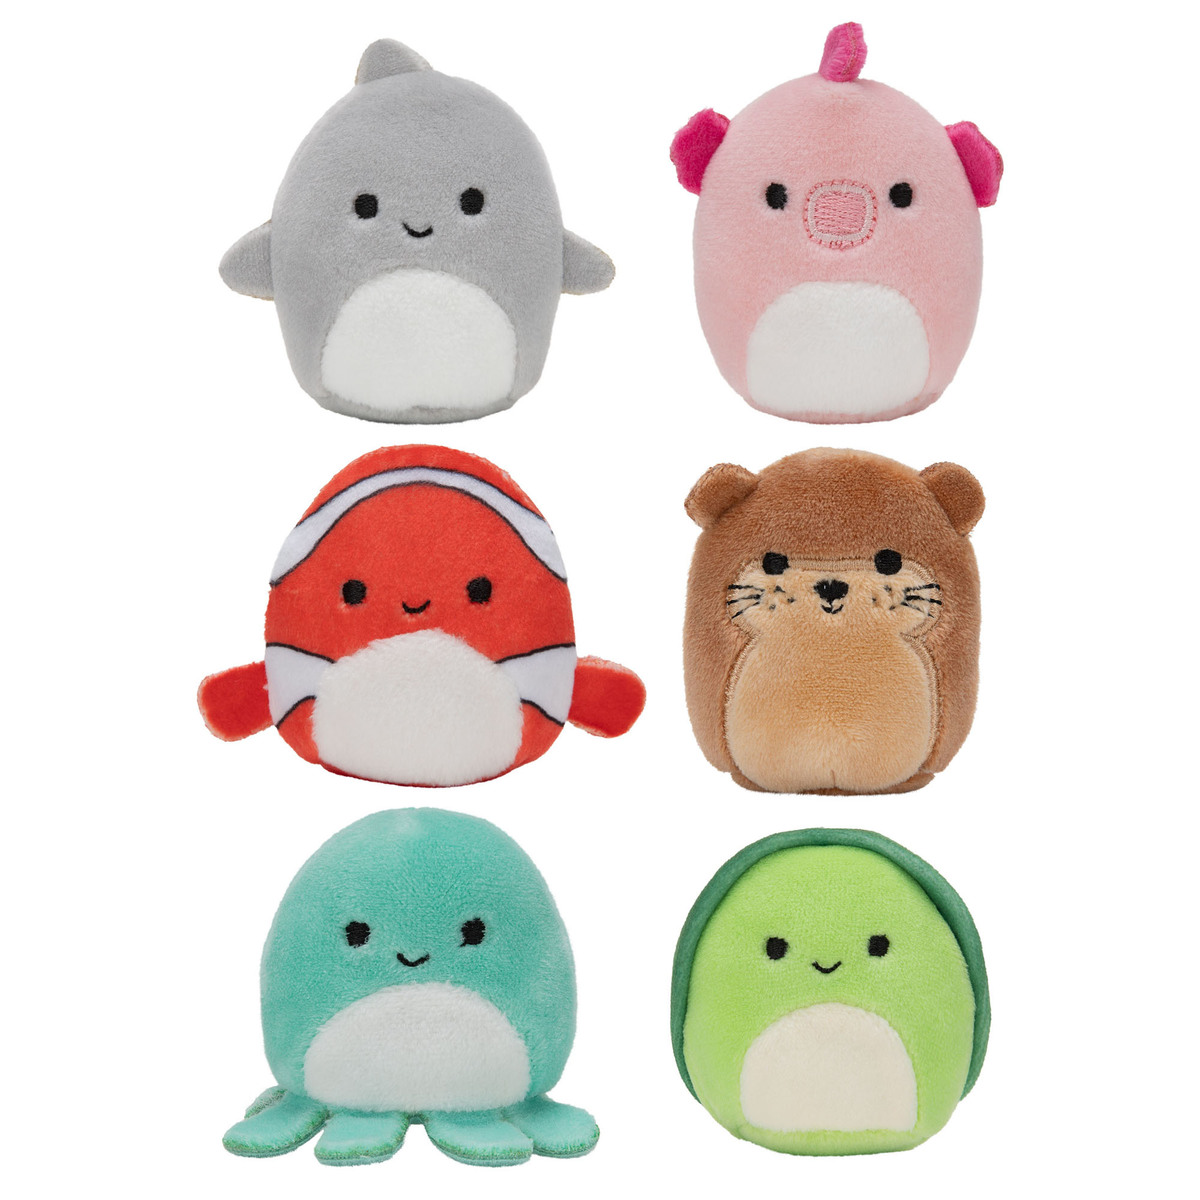  Squishville Soft Toy 6 Pack - Sealife Squad (Styles Vary)